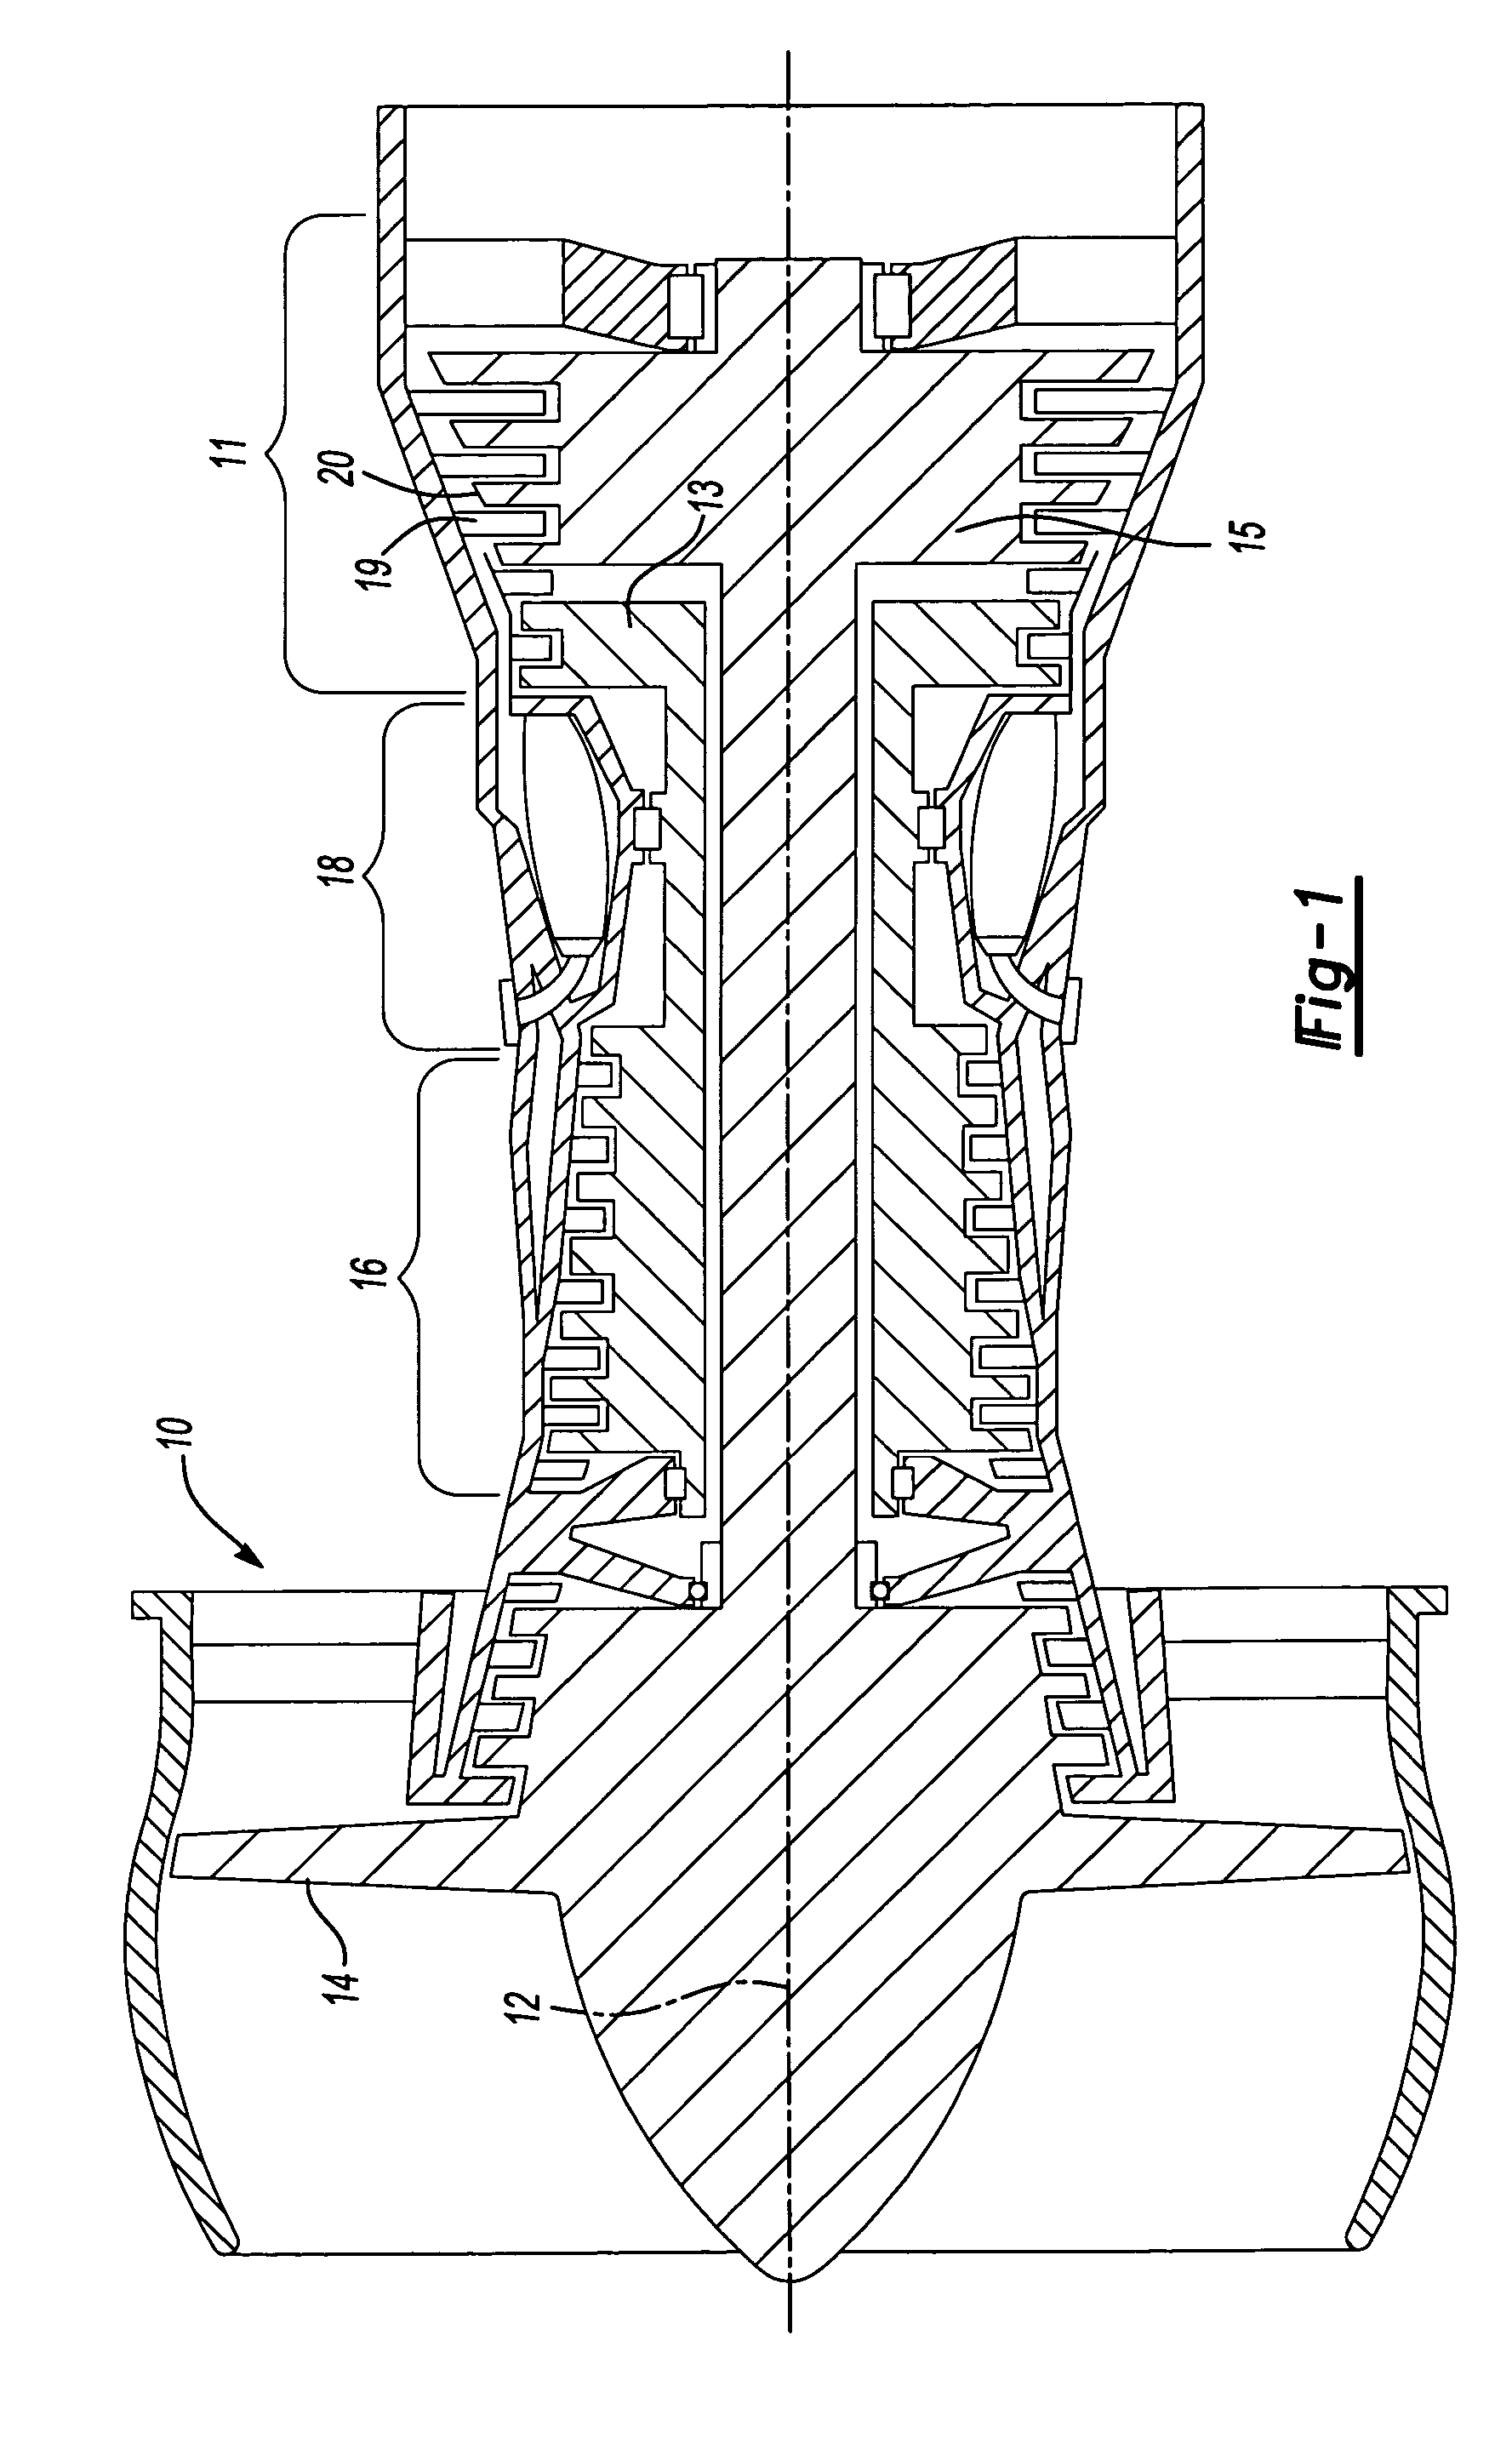 Turbine airfoil with improved cooling